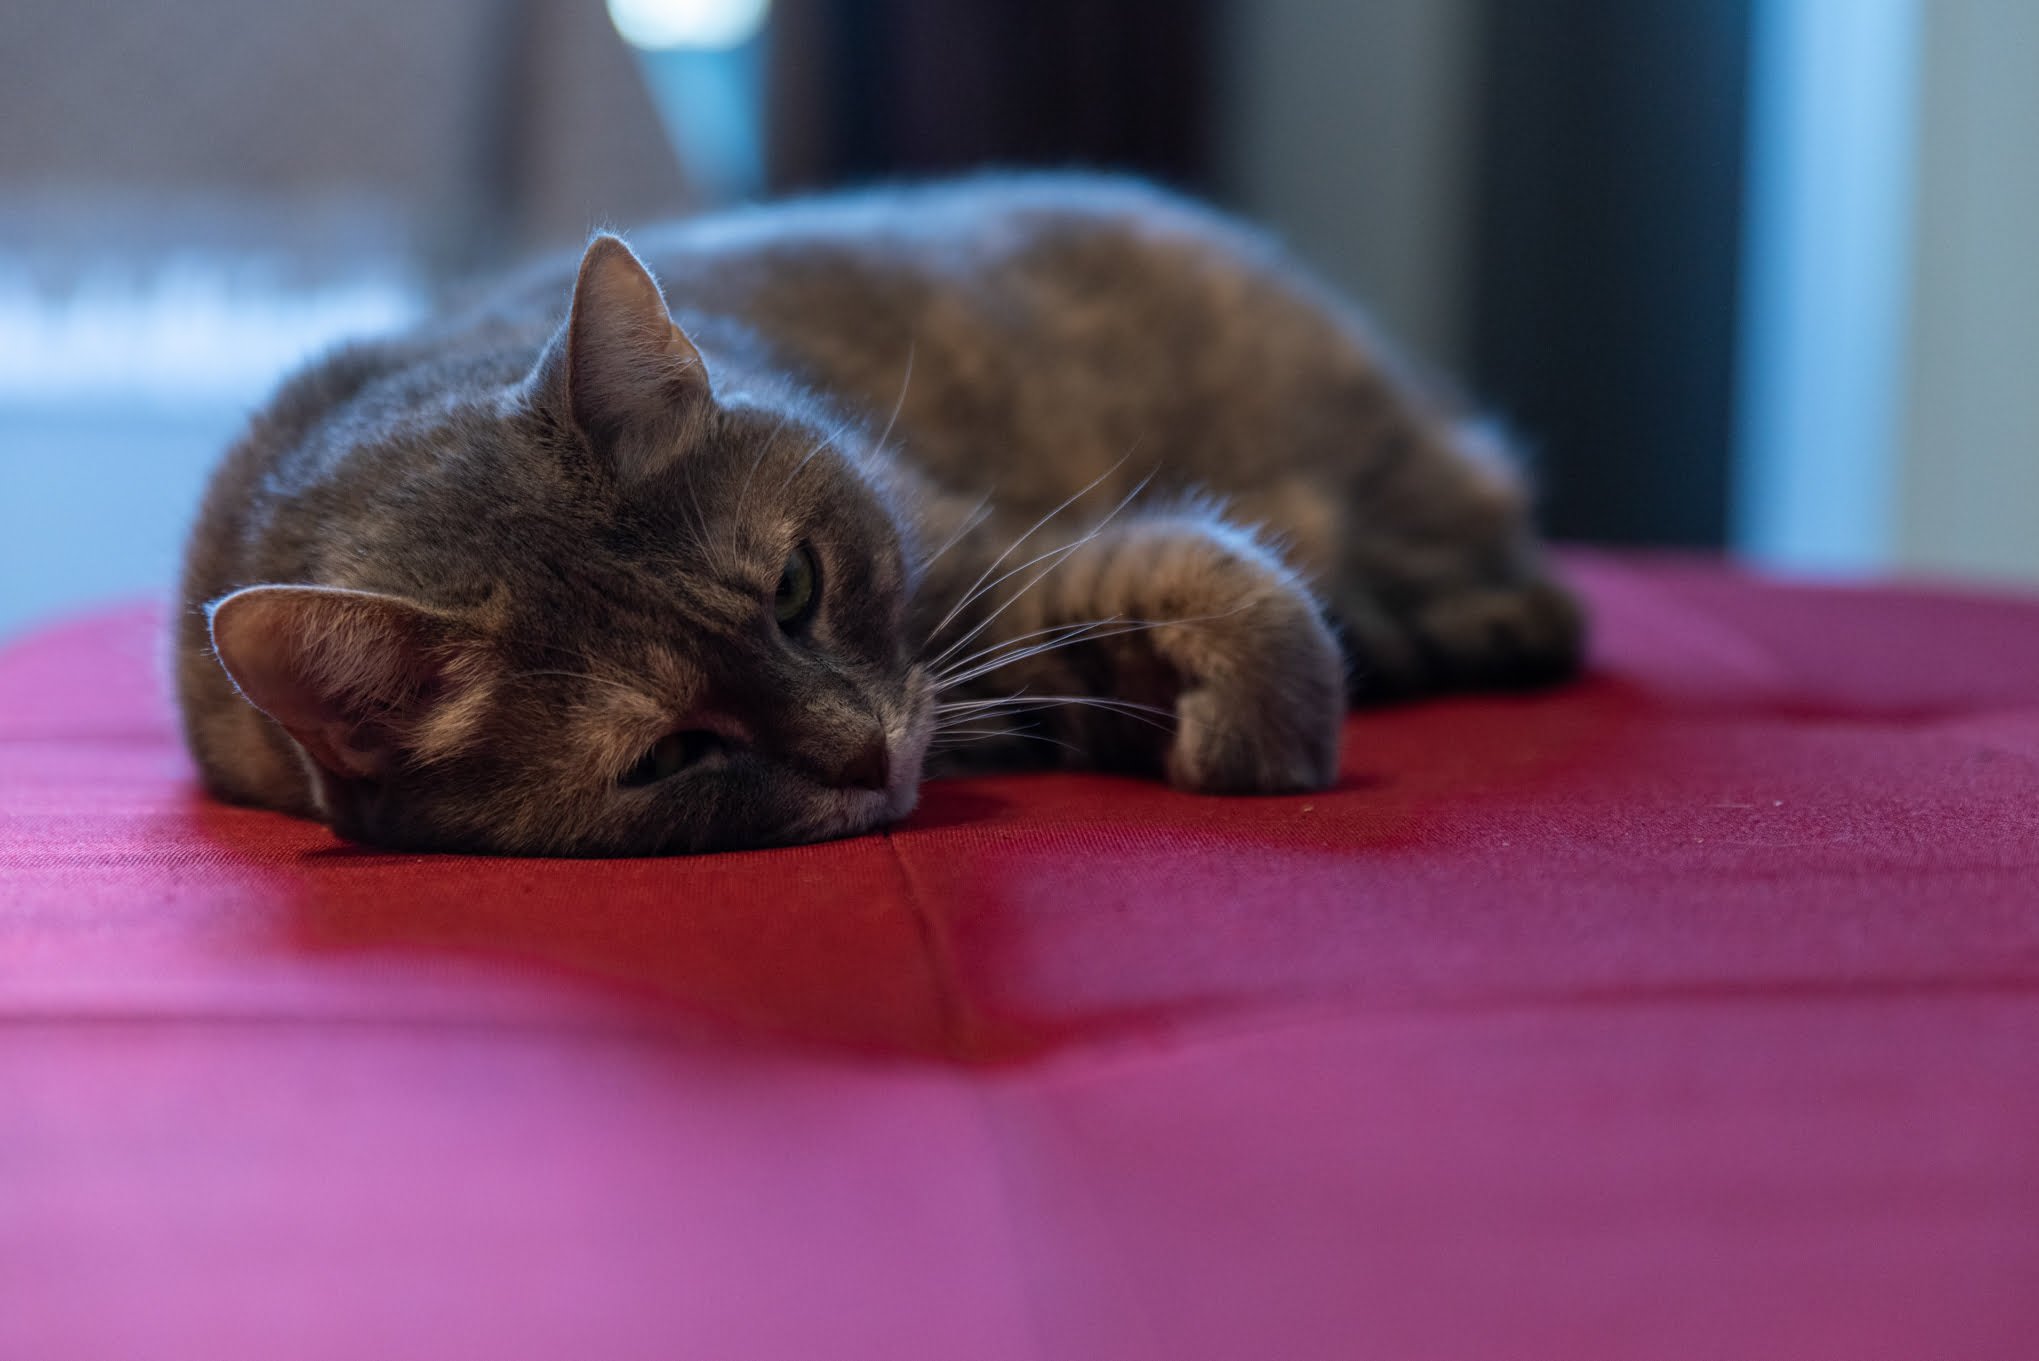 Cat Sleeping on a red sofa